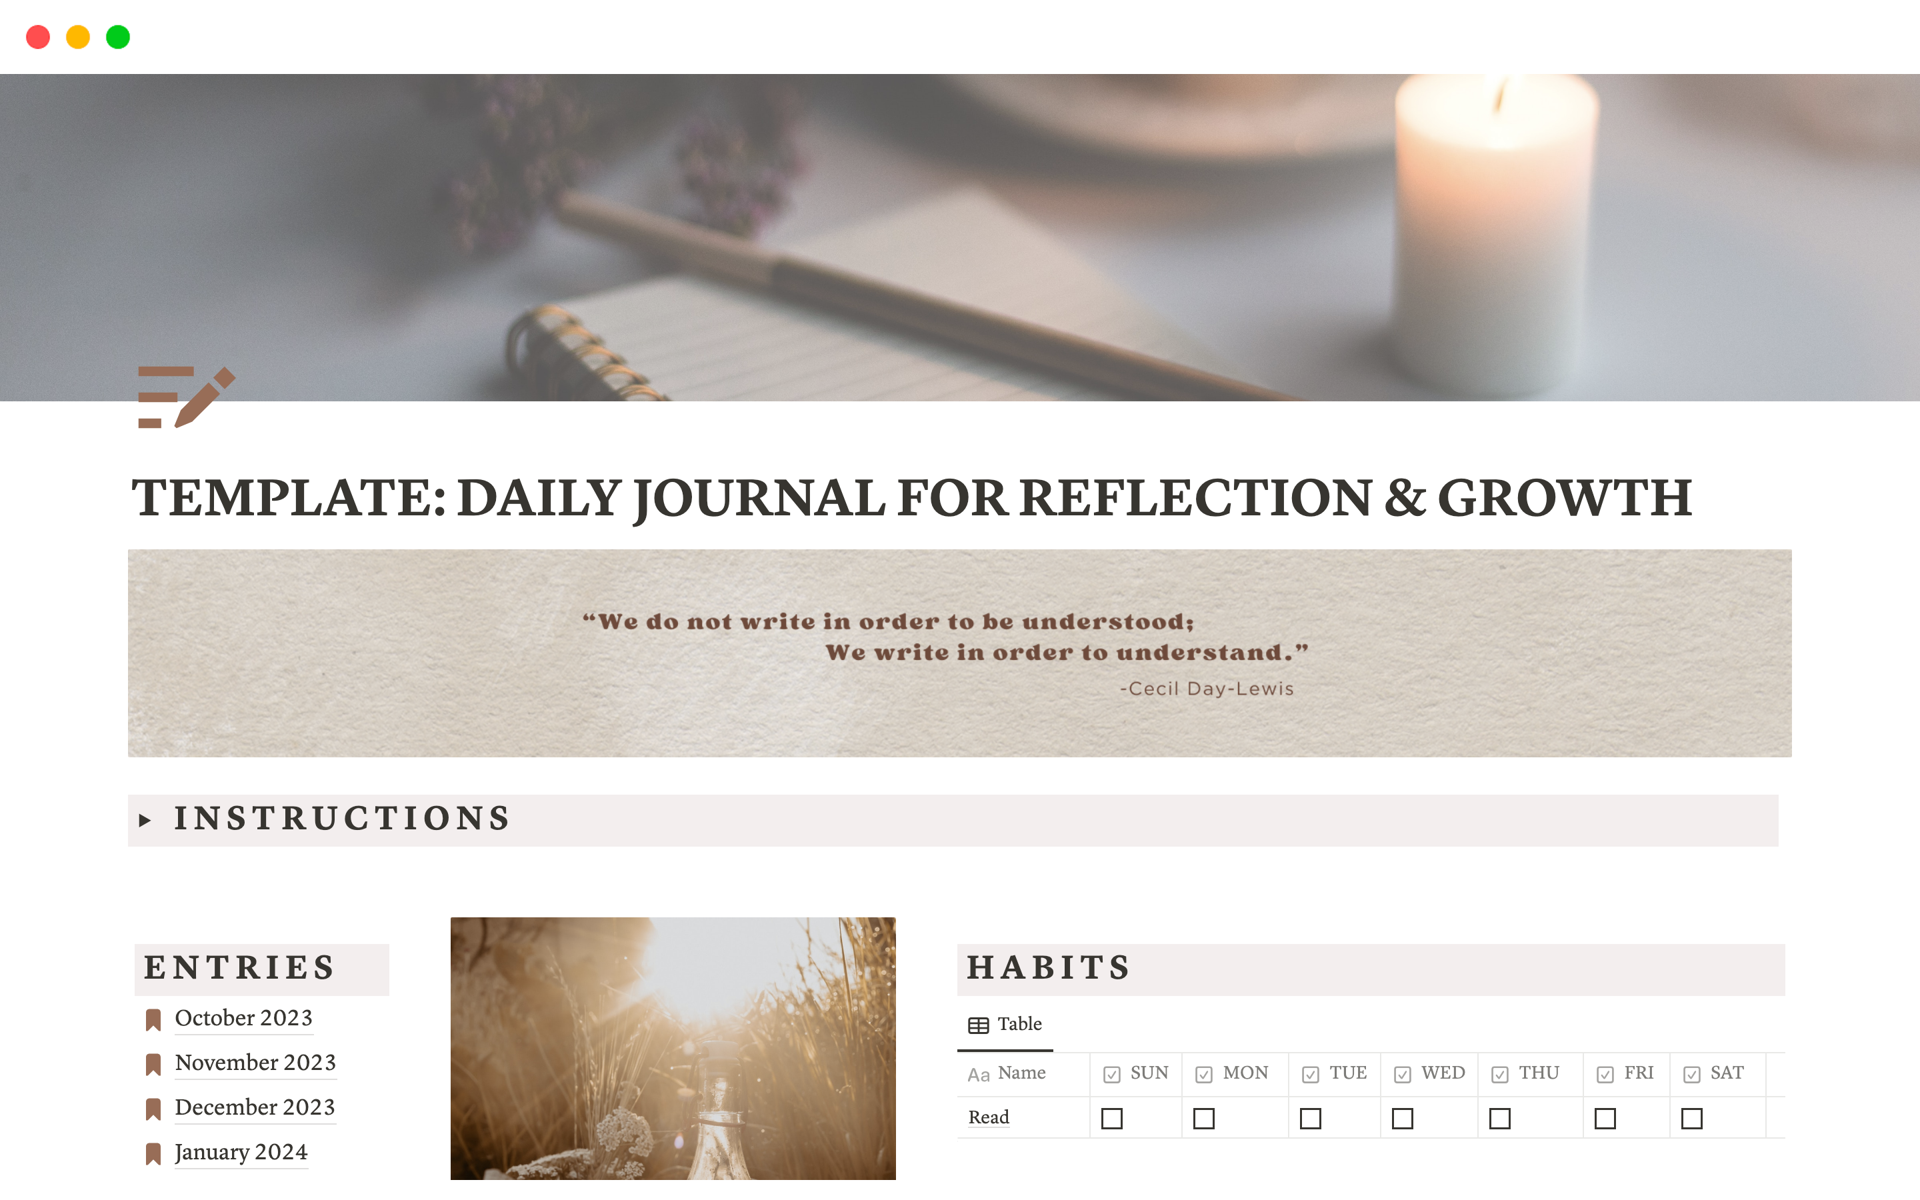 A template preview for DAILY JOURNAL FOR REFLECTION & GROWTH